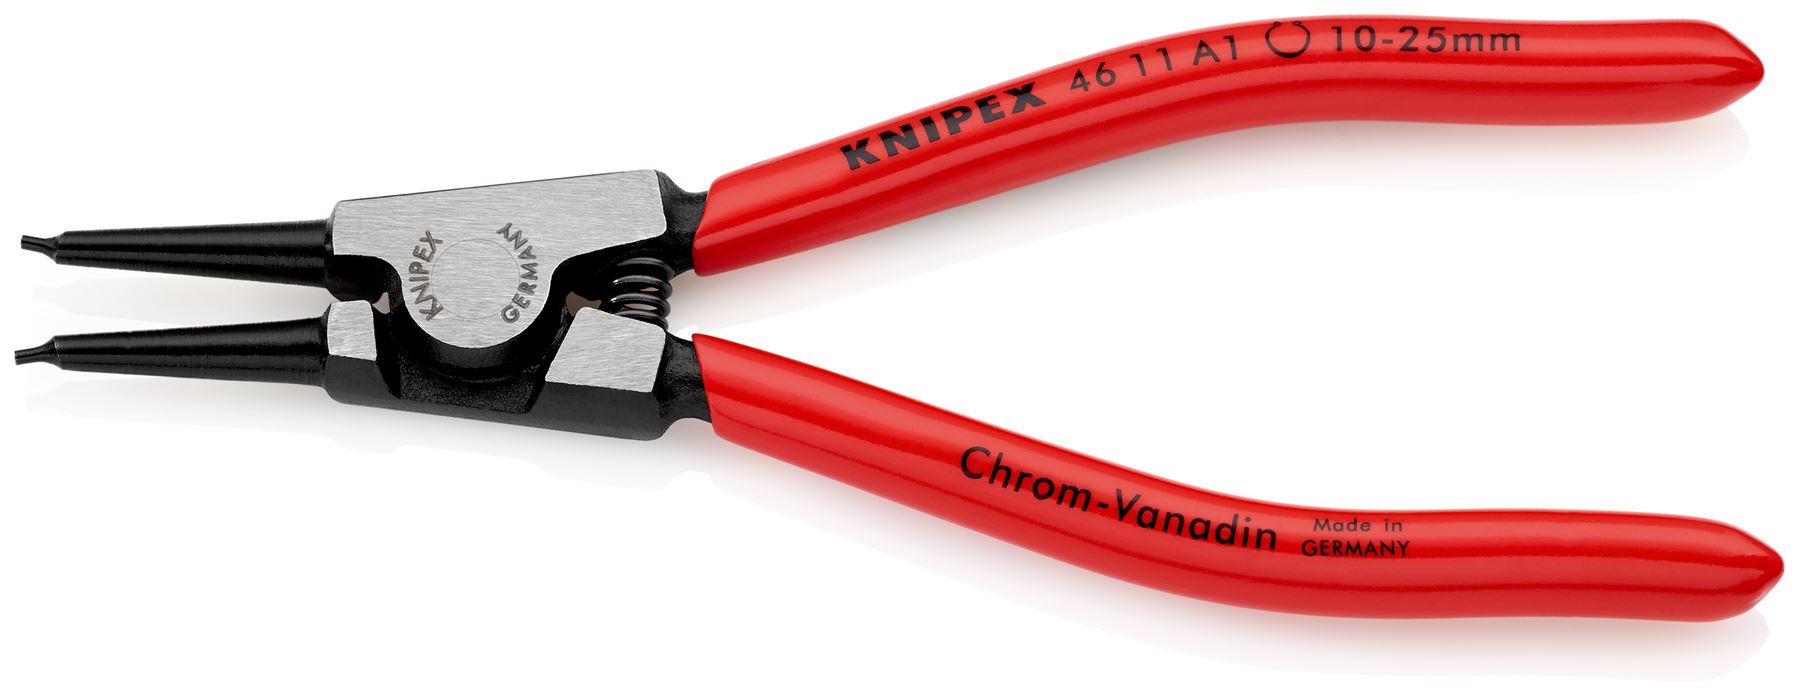 KNIPEX Circlip Pliers for External Circlips on Shafts 140mm 1.3mm Diameter Tips 46 11 A1 SB